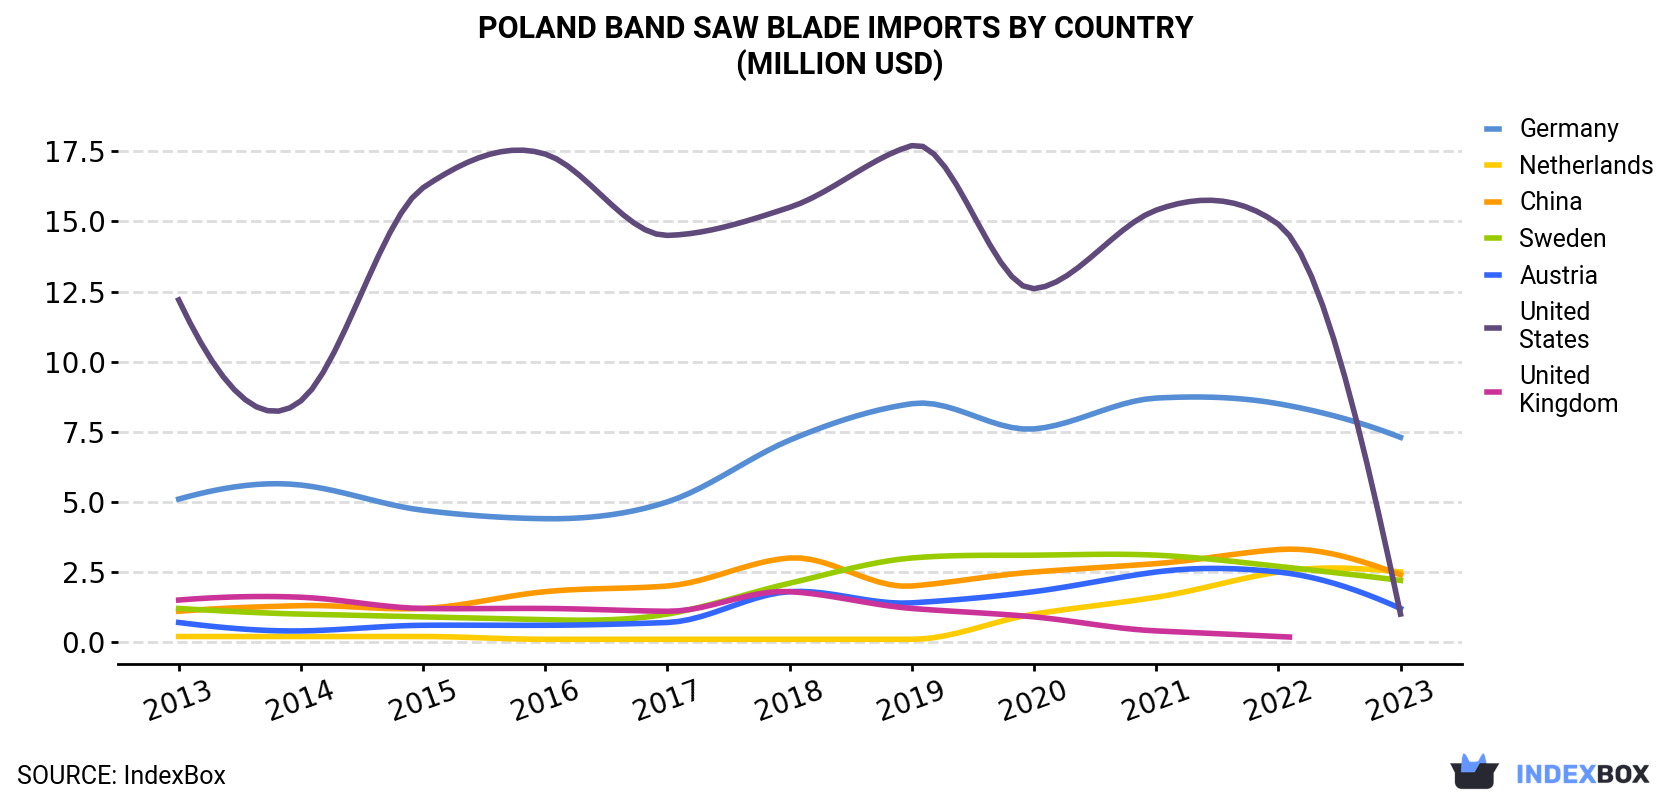 Poland Band Saw Blade Imports By Country (Million USD)